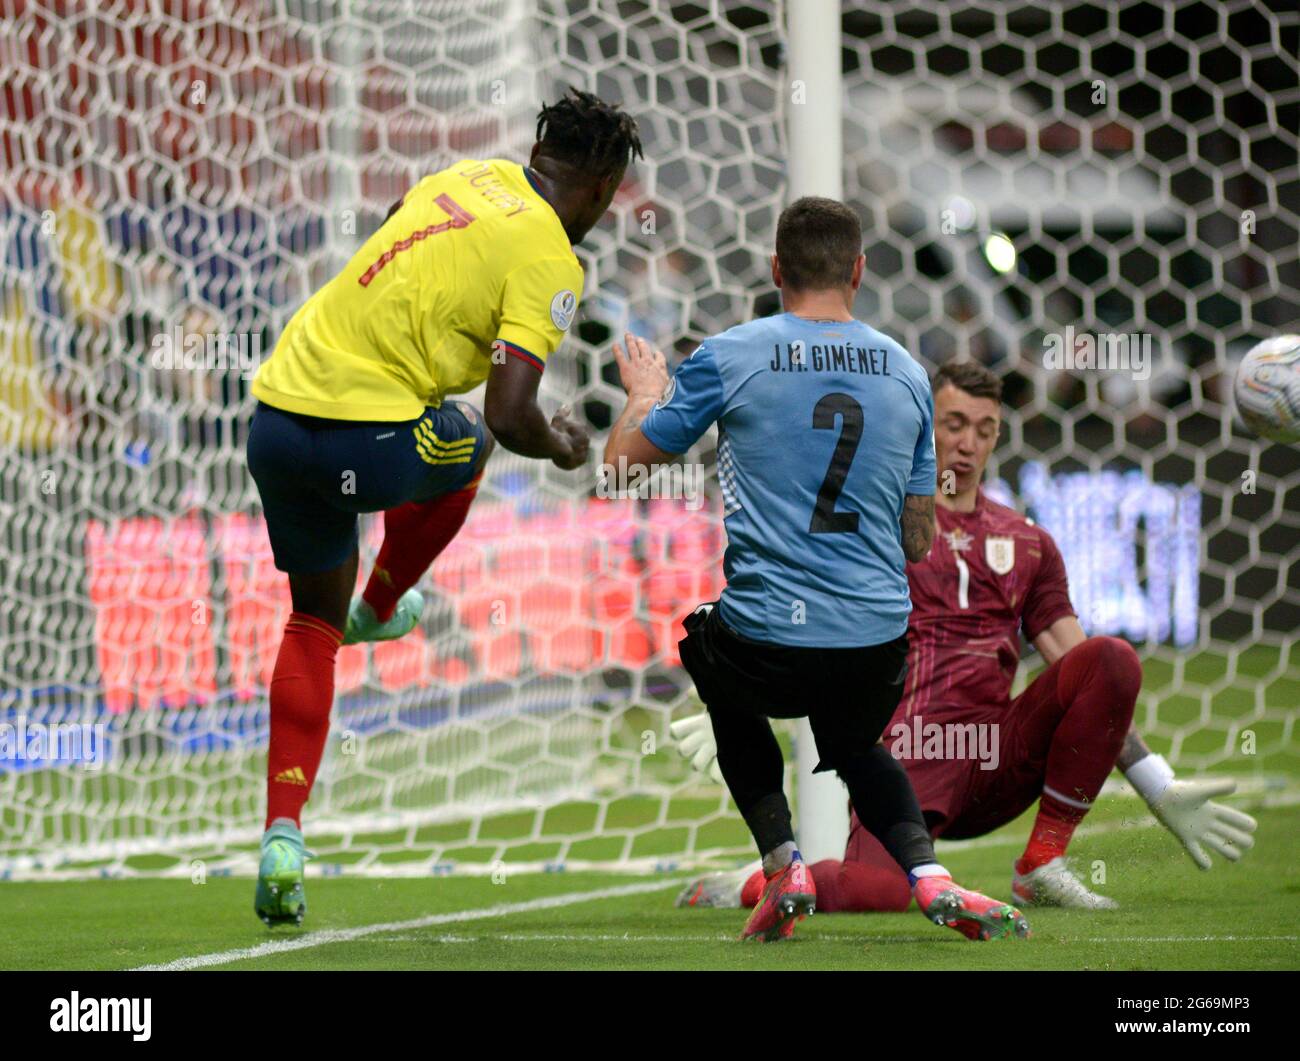 BRASILIA, BRAZIL - JULY 03: Duvan Zapata of Colombia competes for the ball with Fernando Muslera and Jose Gimenez of Uruguay ,during the Quarterfinal match between Uruguay and Colombia as part of Conmebol Copa America Brazil 2021 at Mane Garrincha Stadium on July 3, 2021 in Brasilia, Brazil. (MB Media) Stock Photo